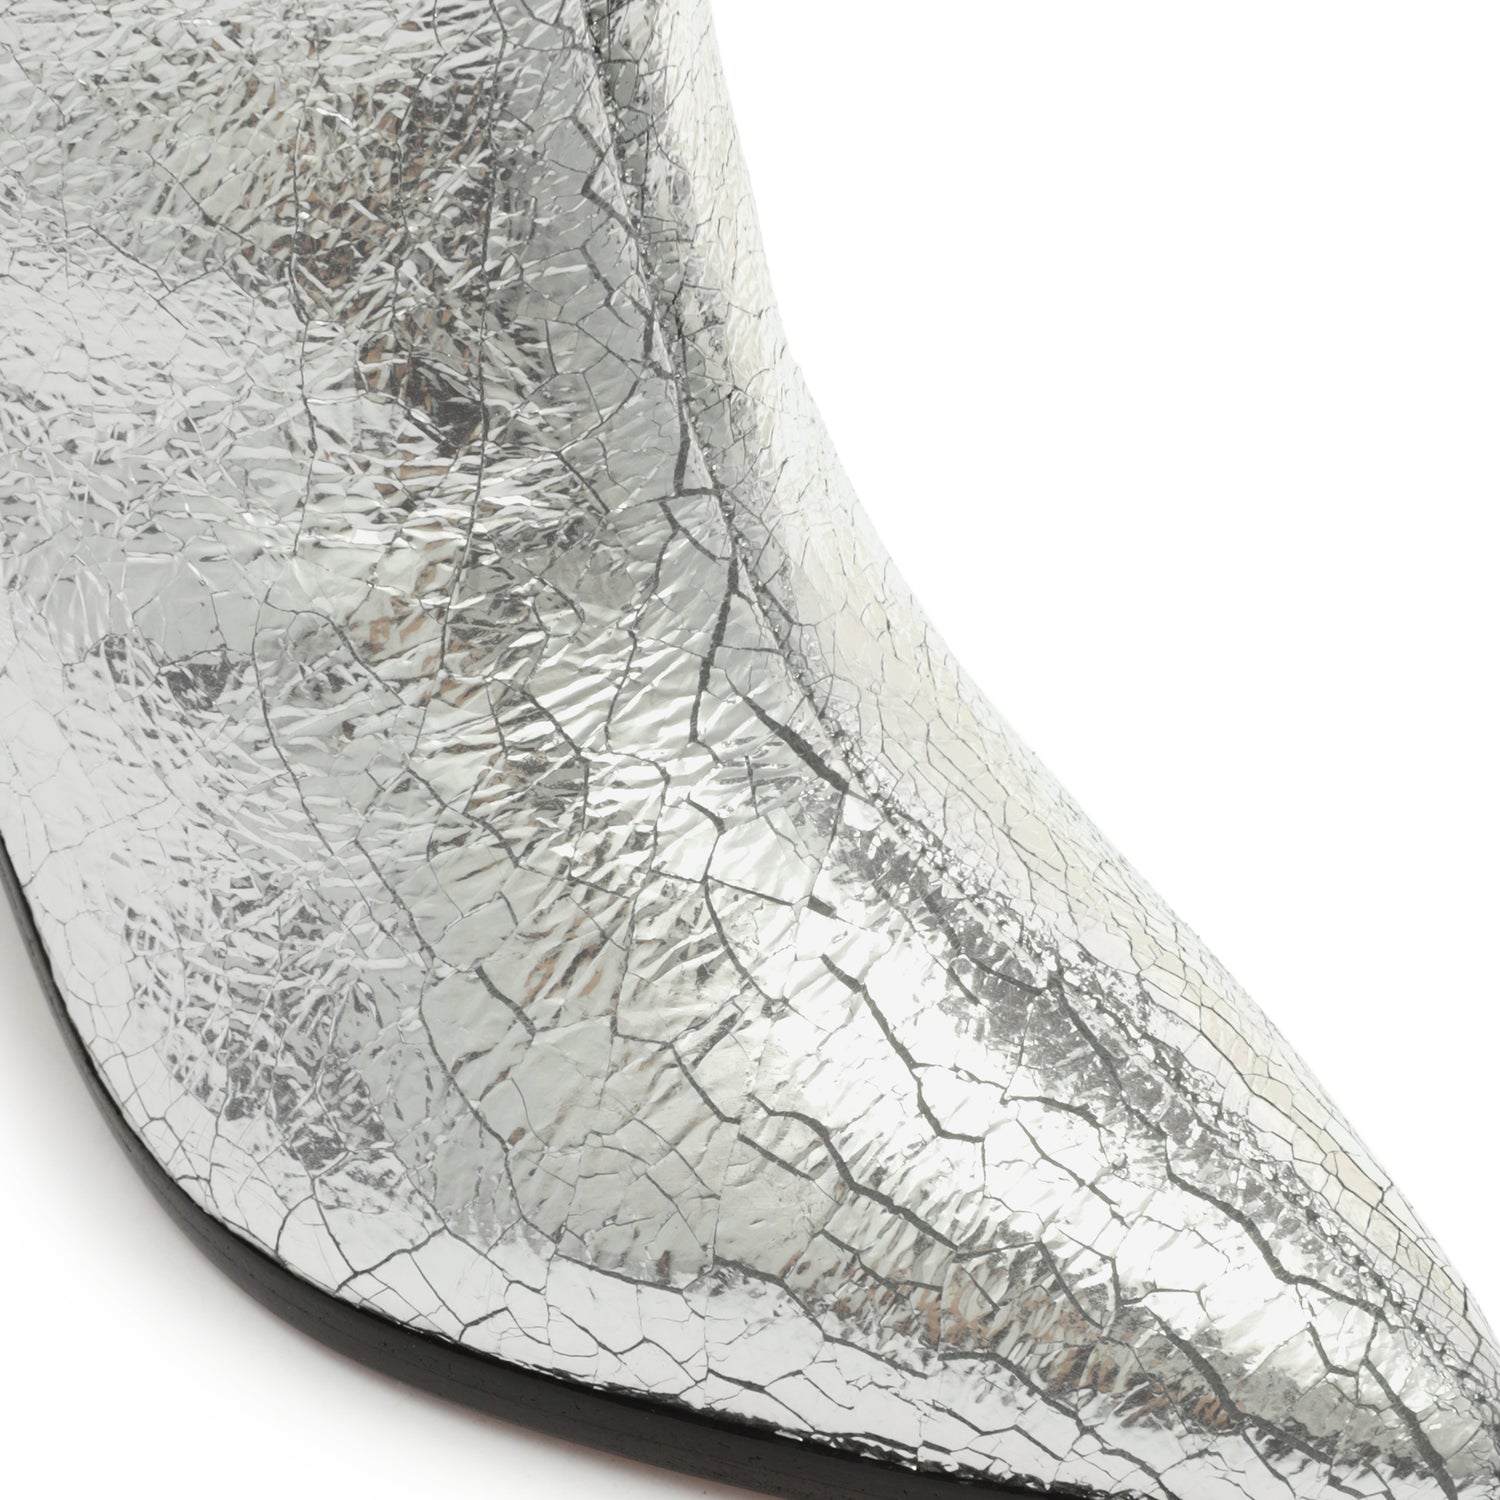 Maryana Block Crackled Leather Boot Silver Crackled Leather